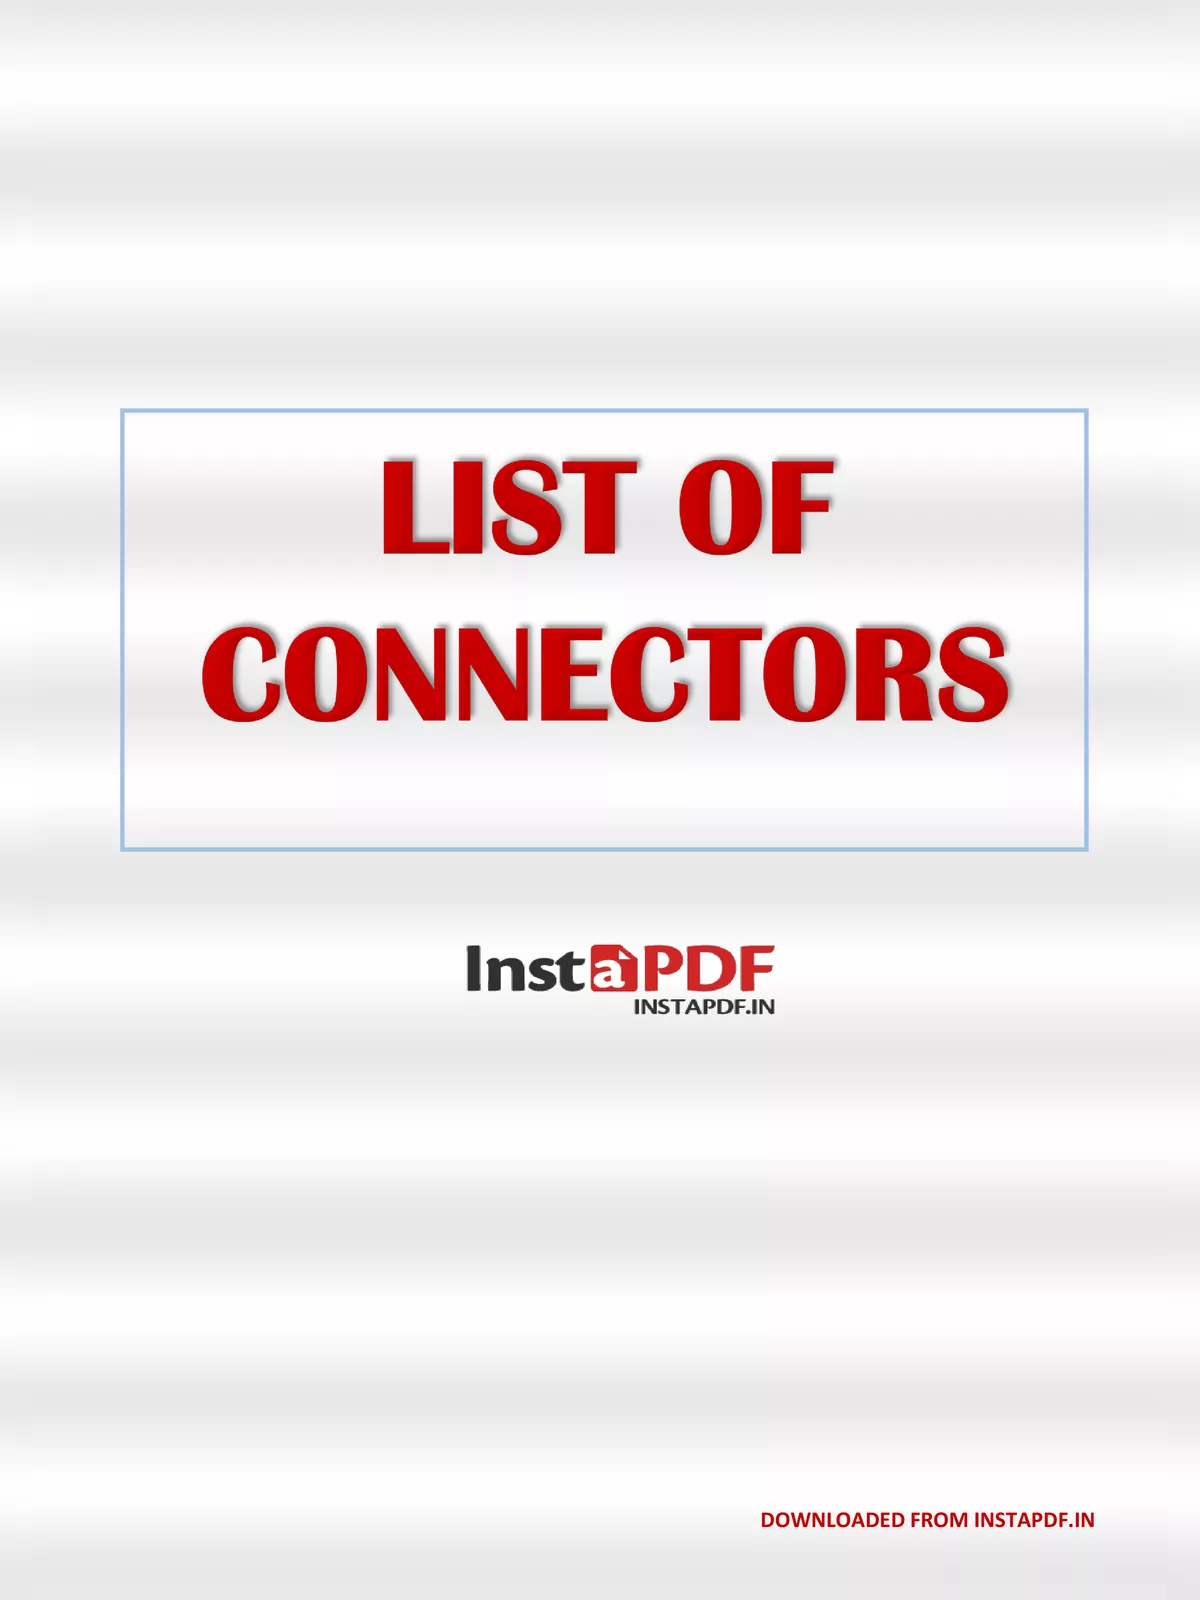 List of Connectors